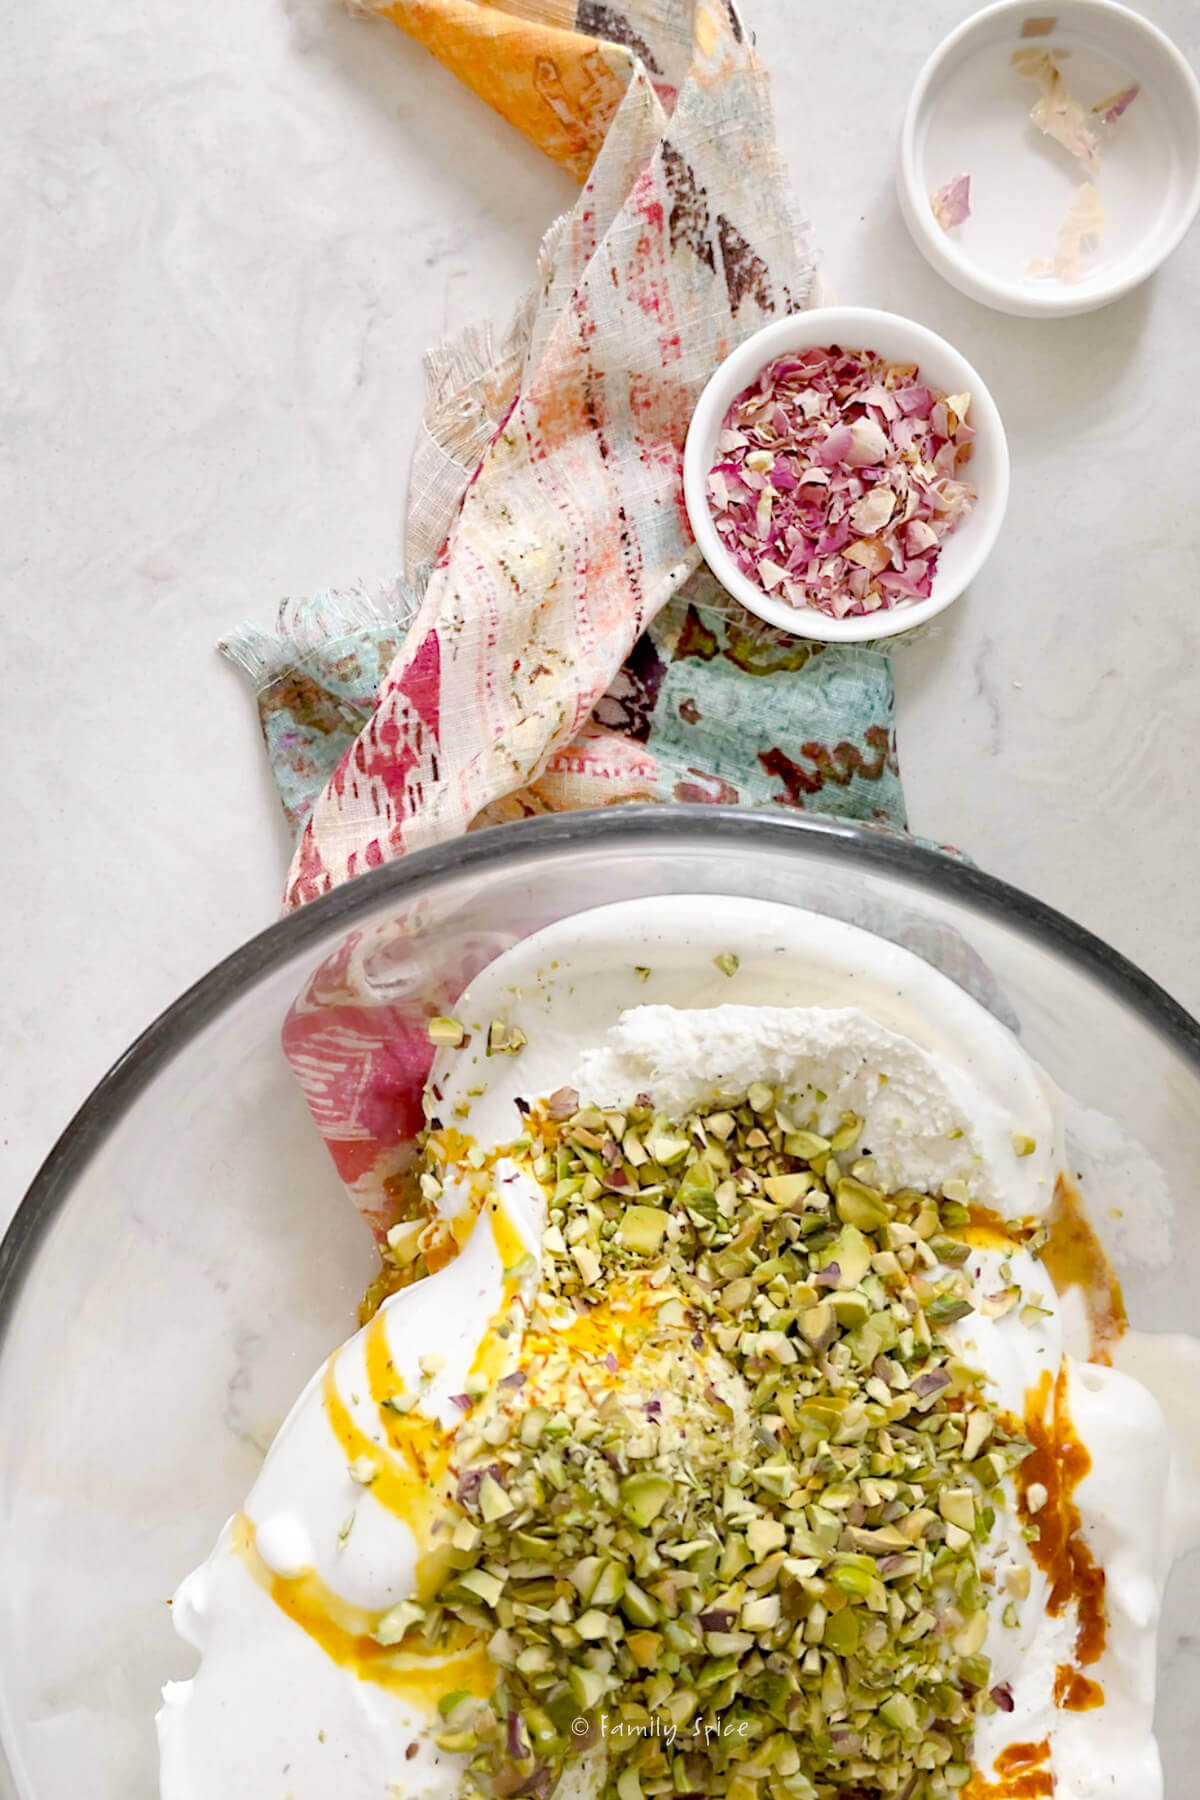 Top view of a large glass mixing bowl with melty vanilla ice cream topped with saffron water and chopped pistachios